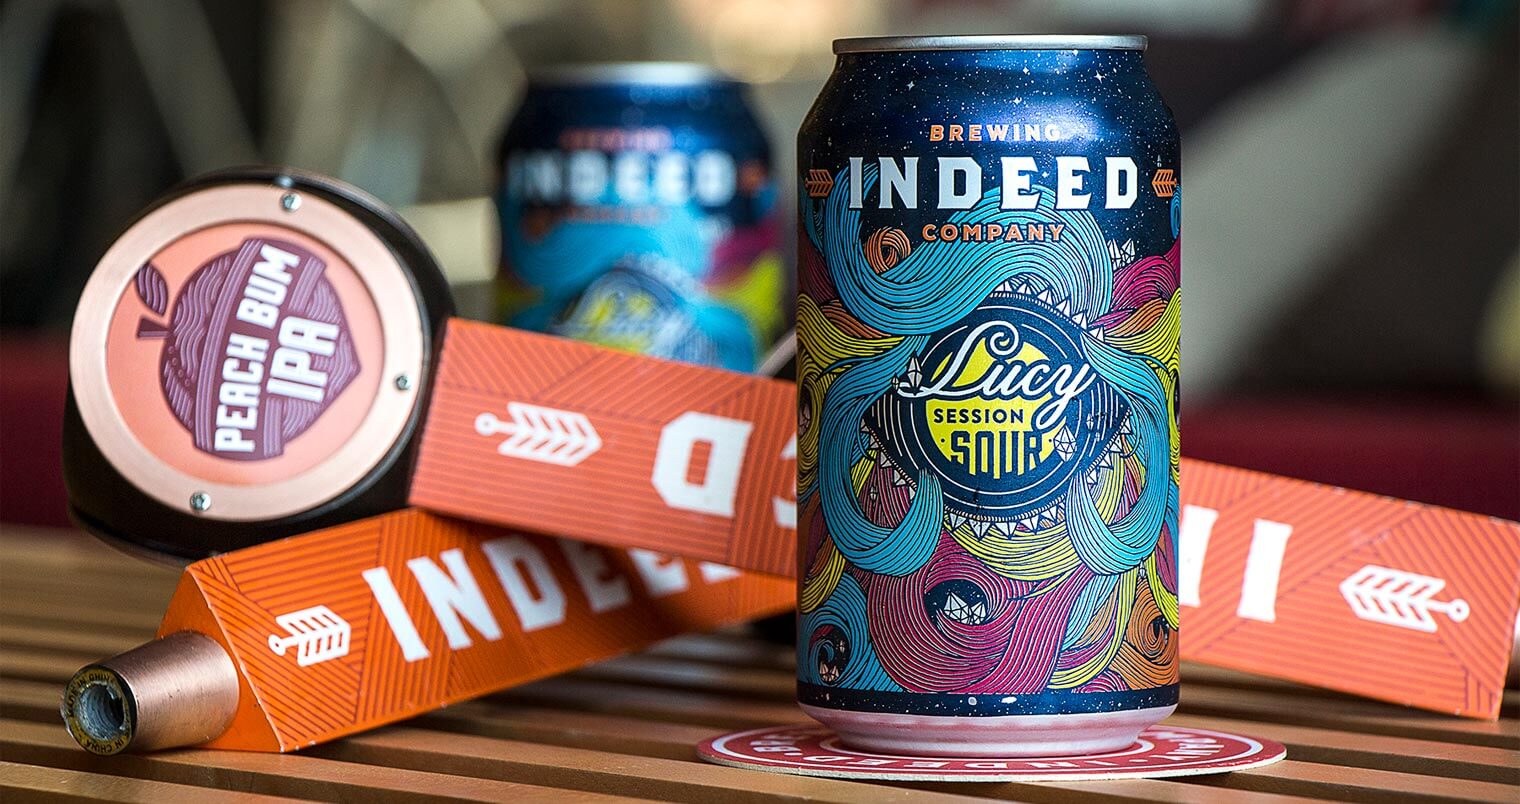 Indeed Brewing Co. Releases Lucy Session Sour Ale and Peach Bum IPA, featured image